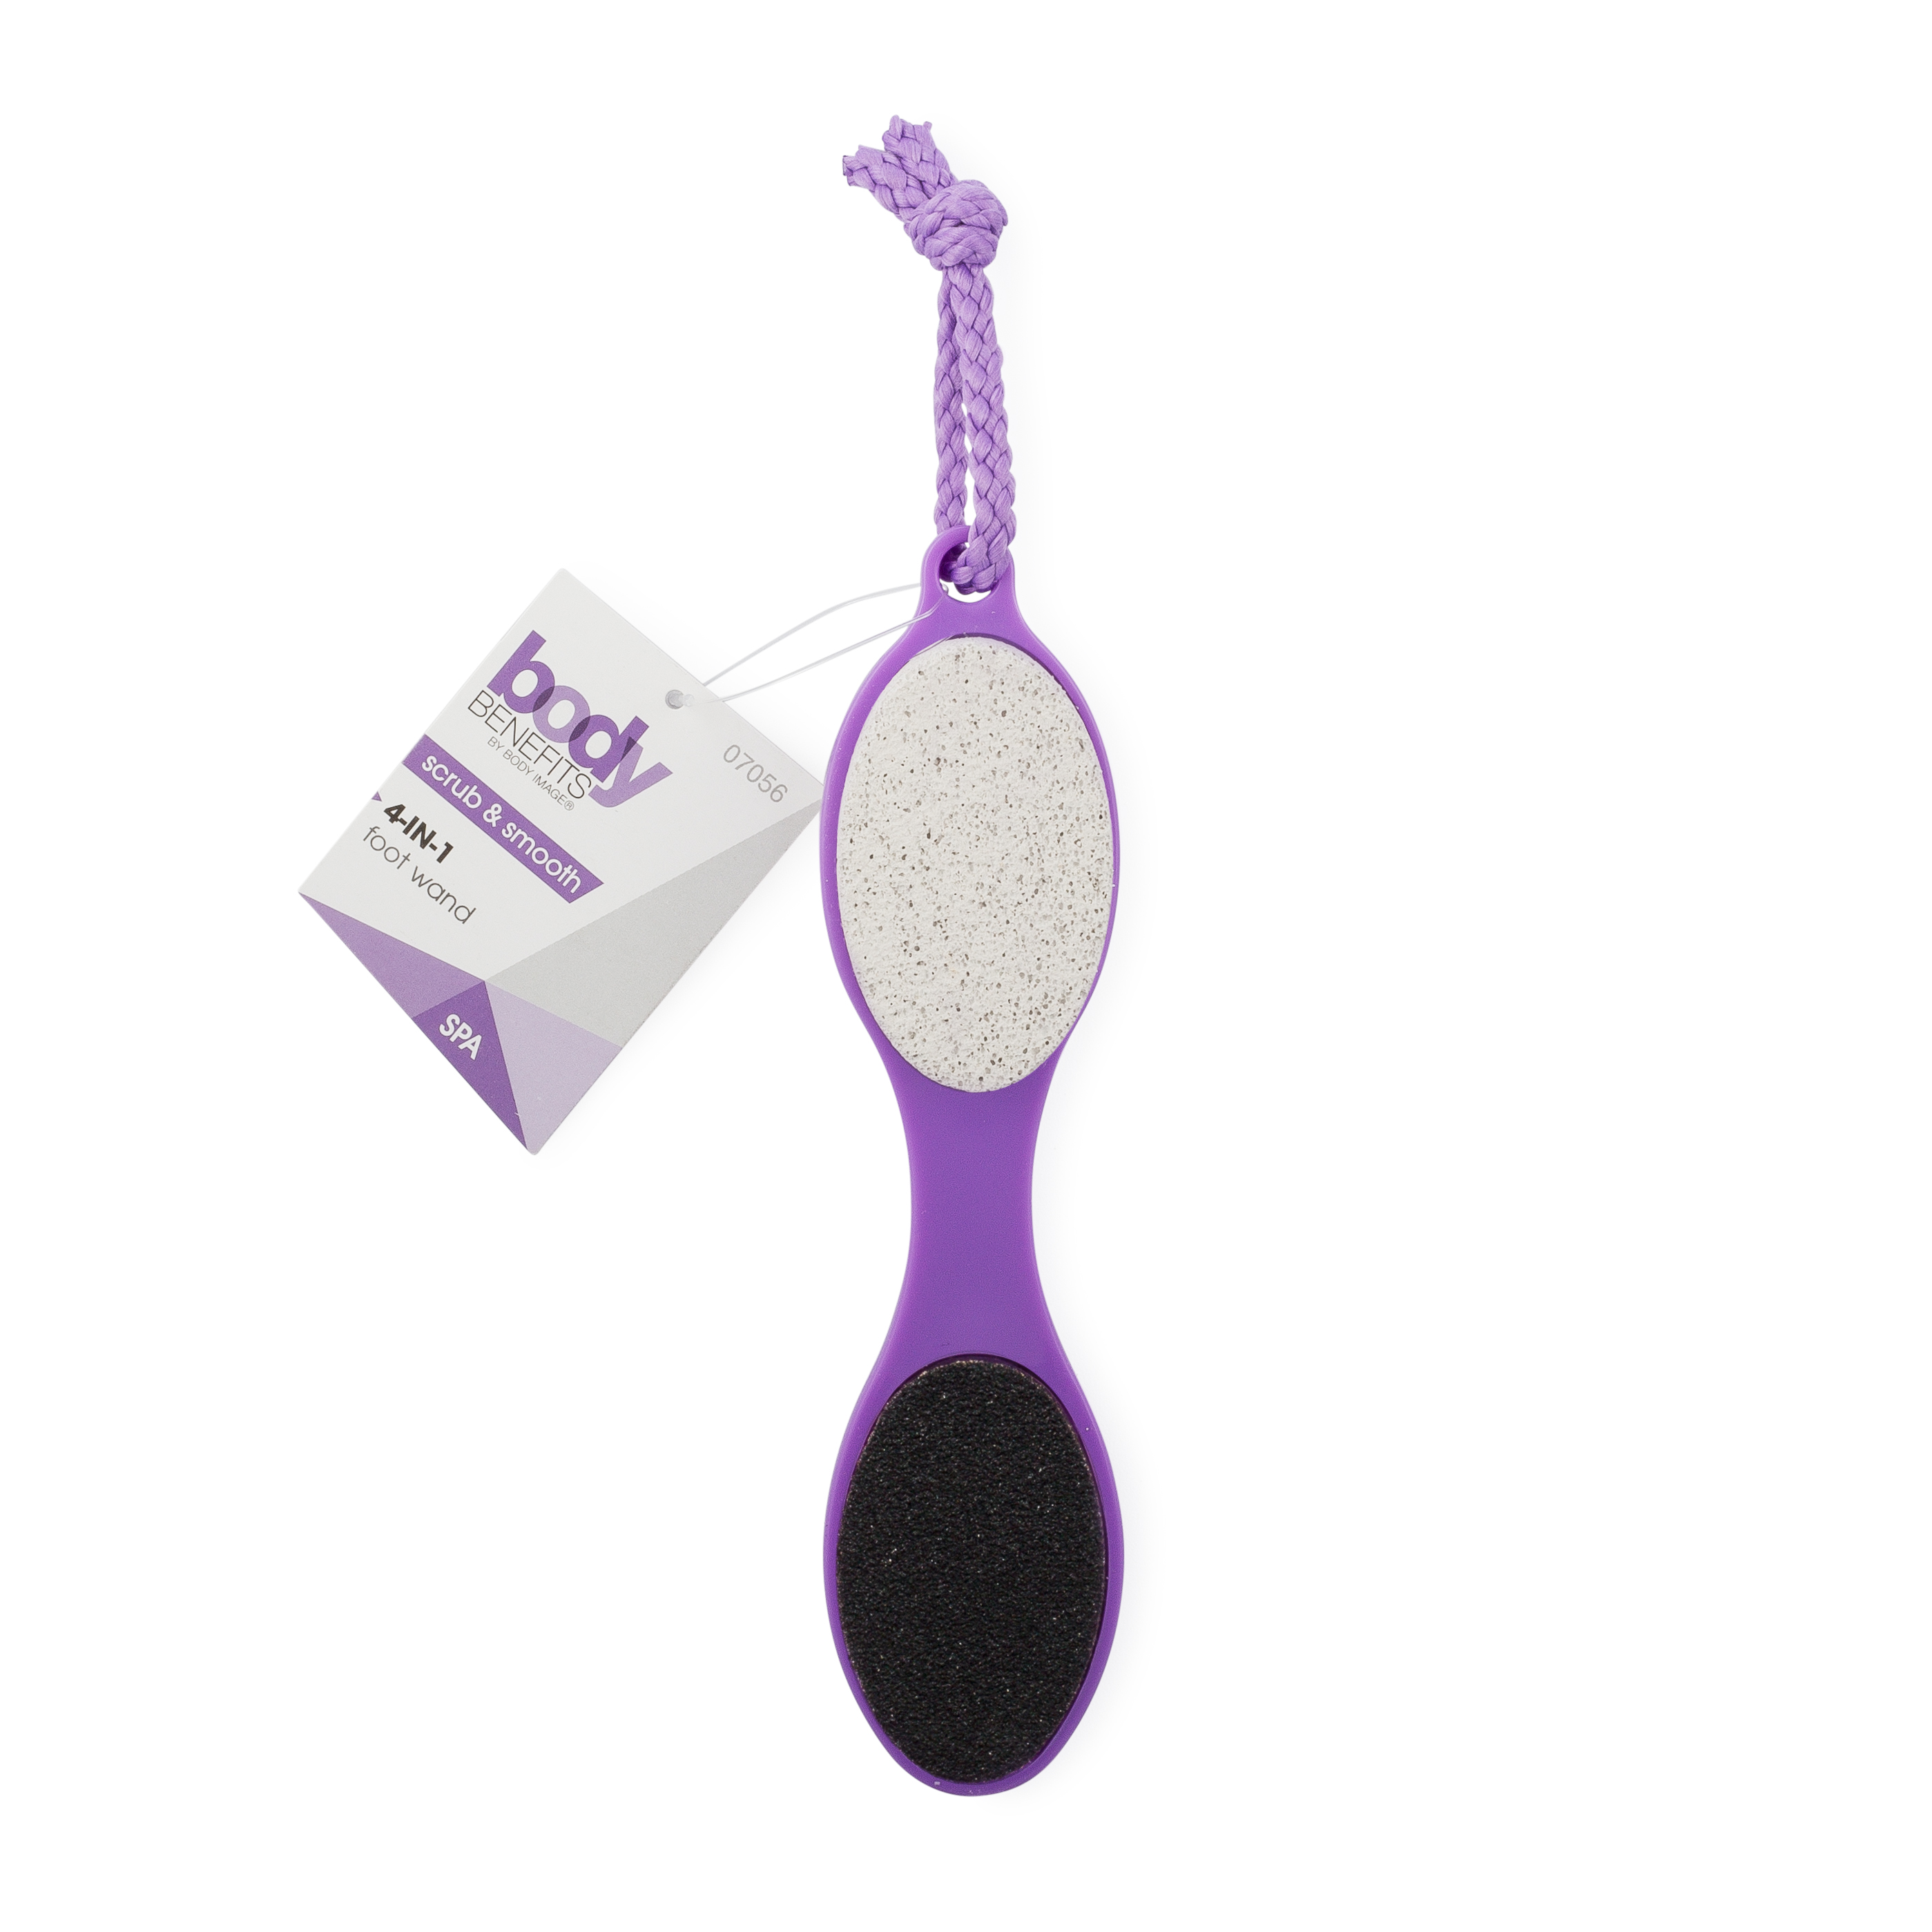 4-in-1 Foot Wand - Color May Vary - image 3 of 5